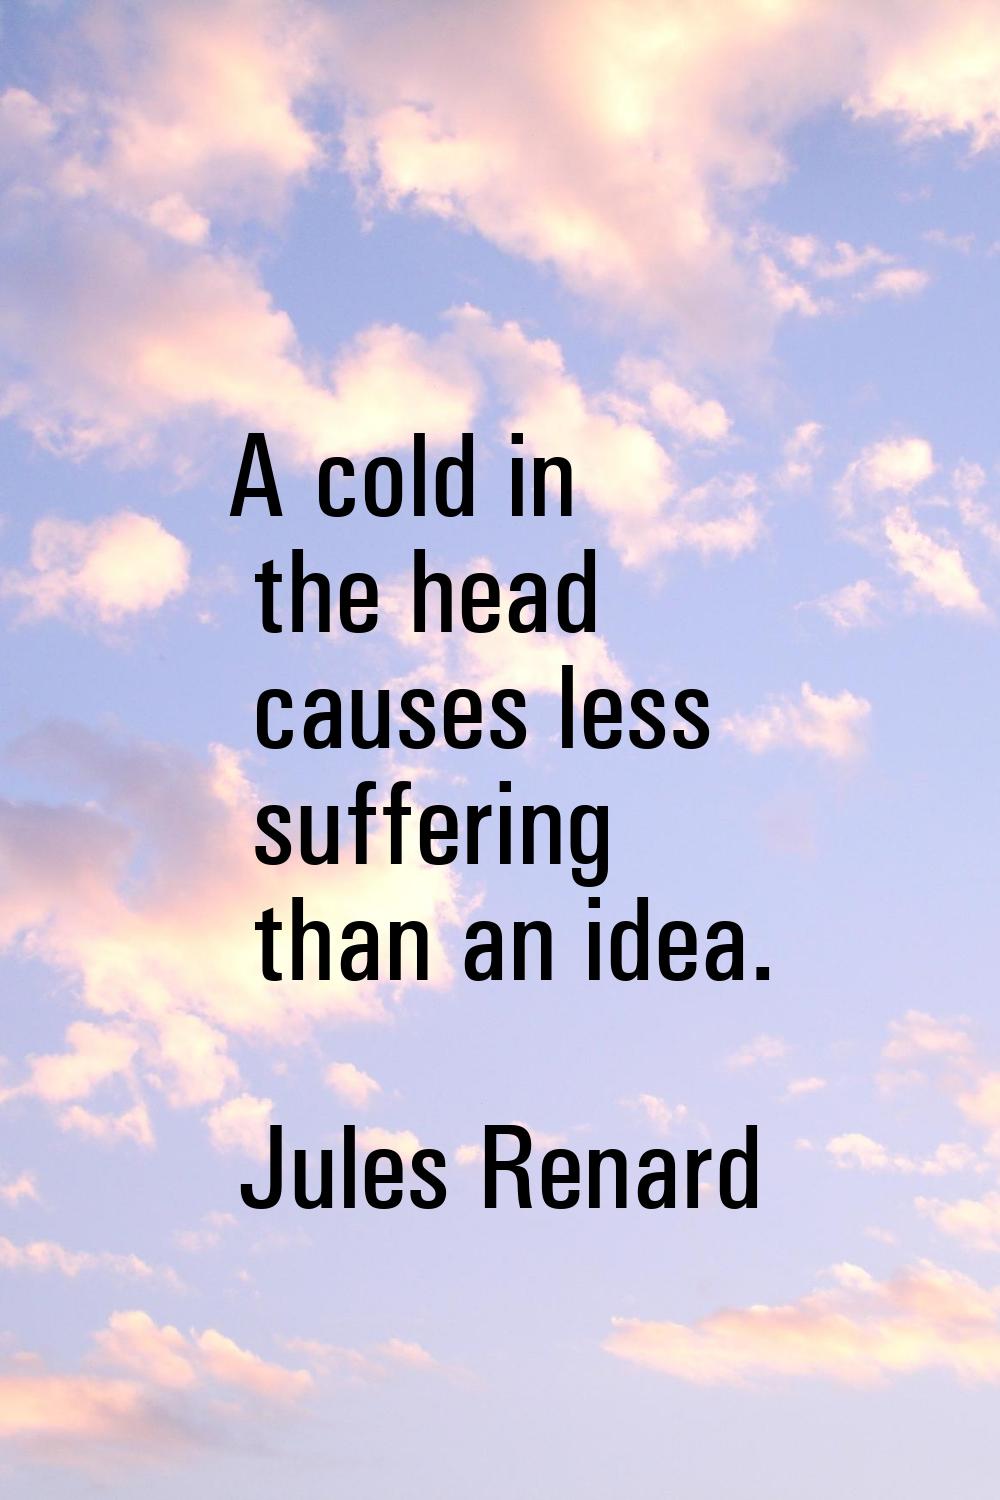 A cold in the head causes less suffering than an idea.